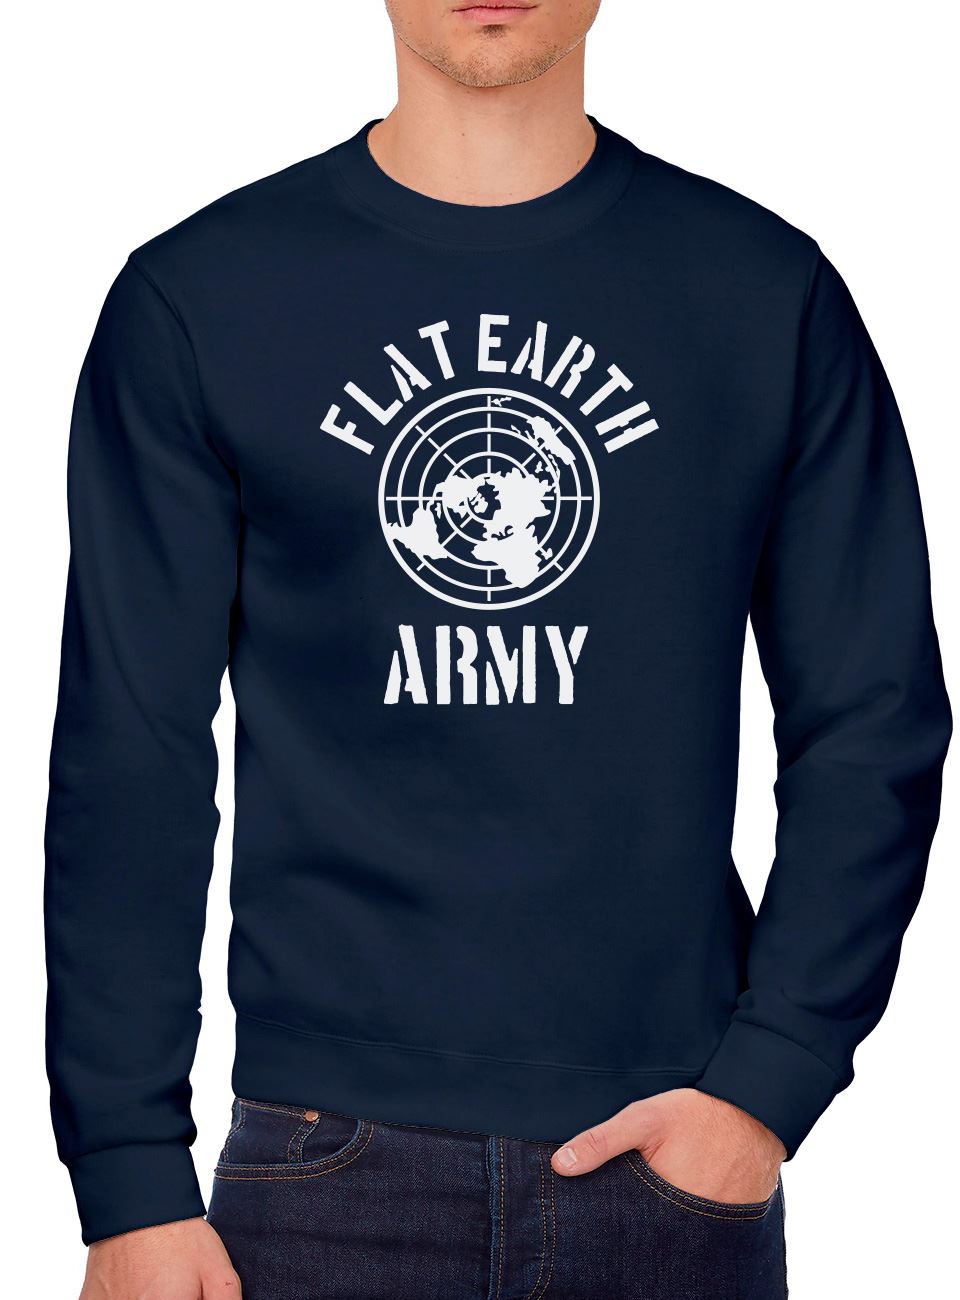 Flat Earth Army Flat-earther Theory - Youth & Mens Sweatshirt